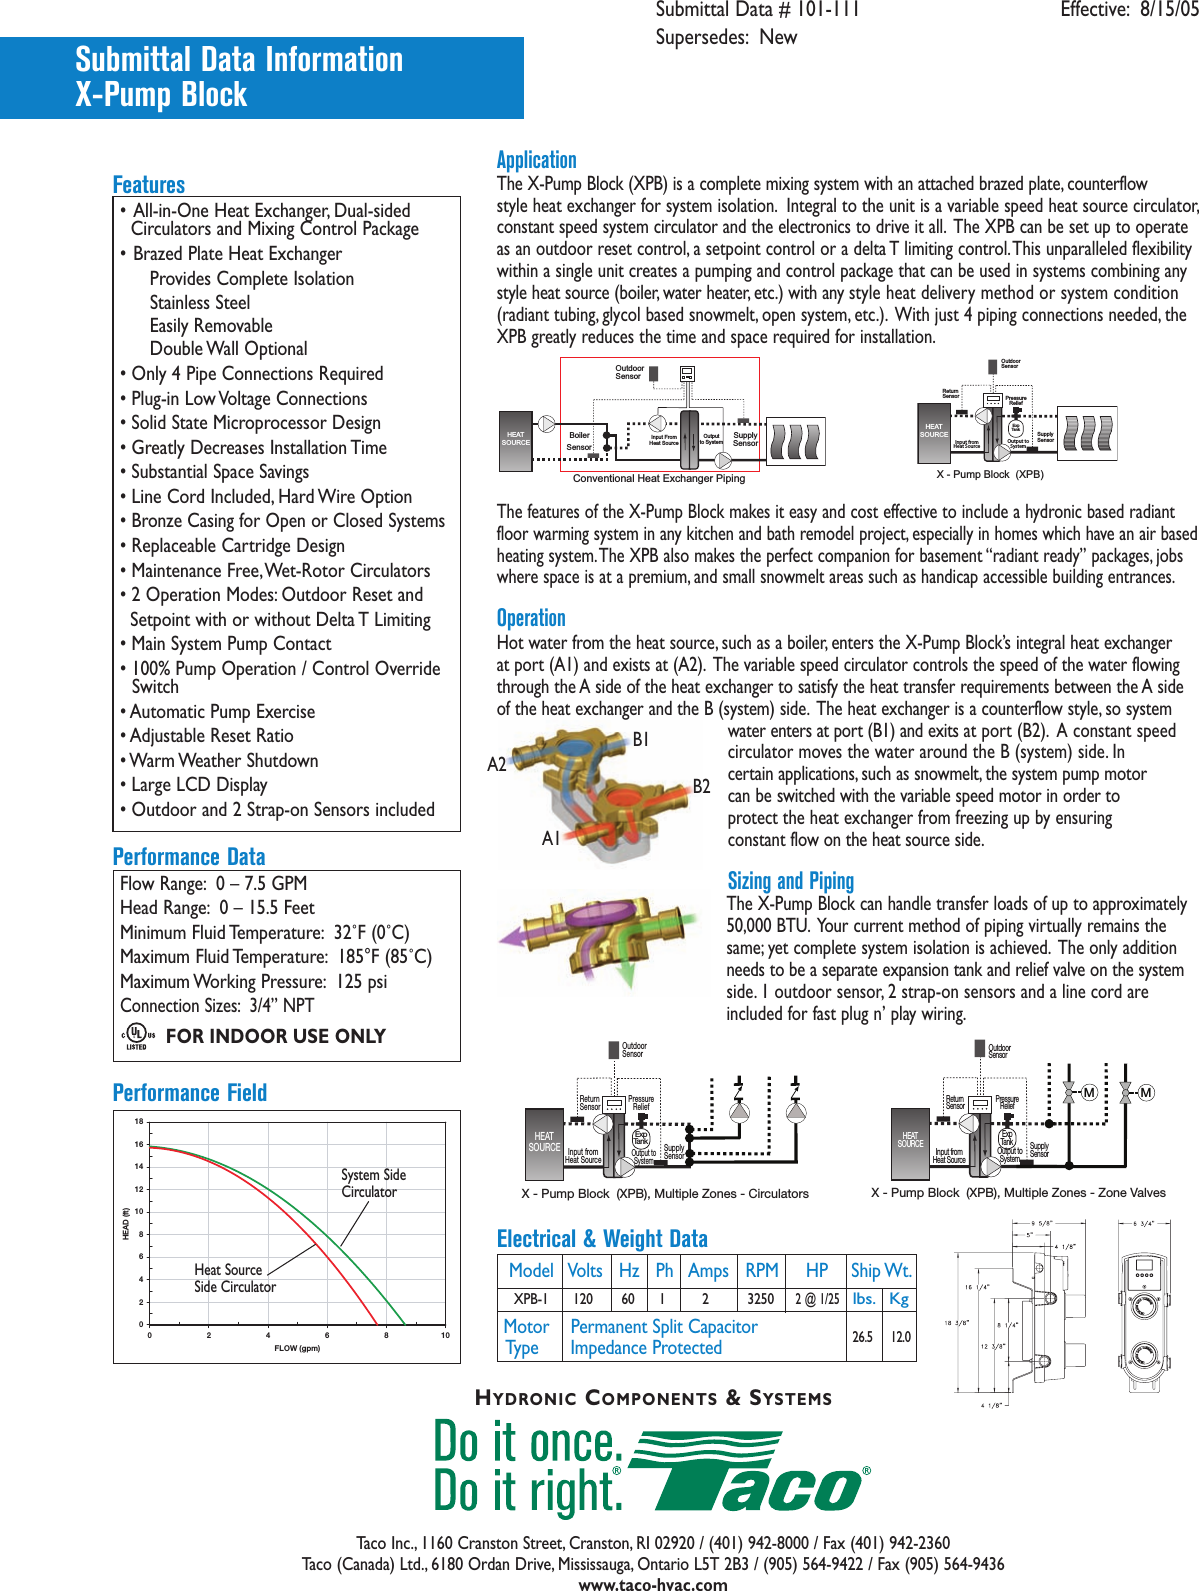 Page 2 of 2 - 12910 1 Taco 193-024Rp Brochure TAC-5682_X-Pump User Manual